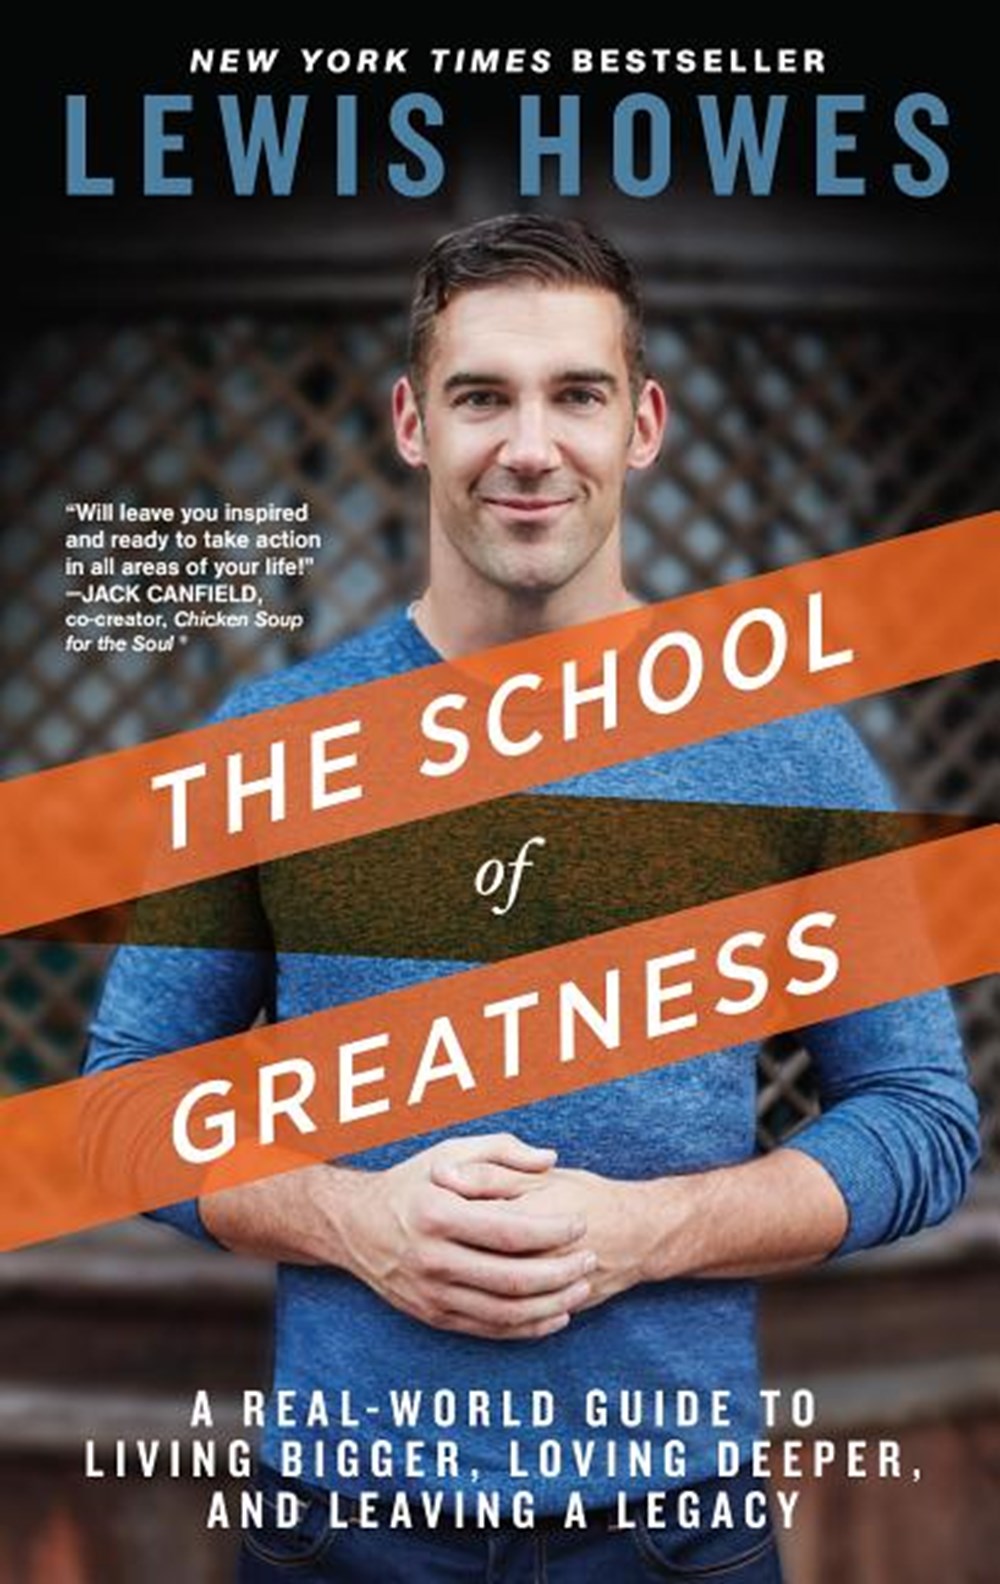 School of Greatness A Real-World Guide to Living Bigger, Loving Deeper, and Leaving a Legacy